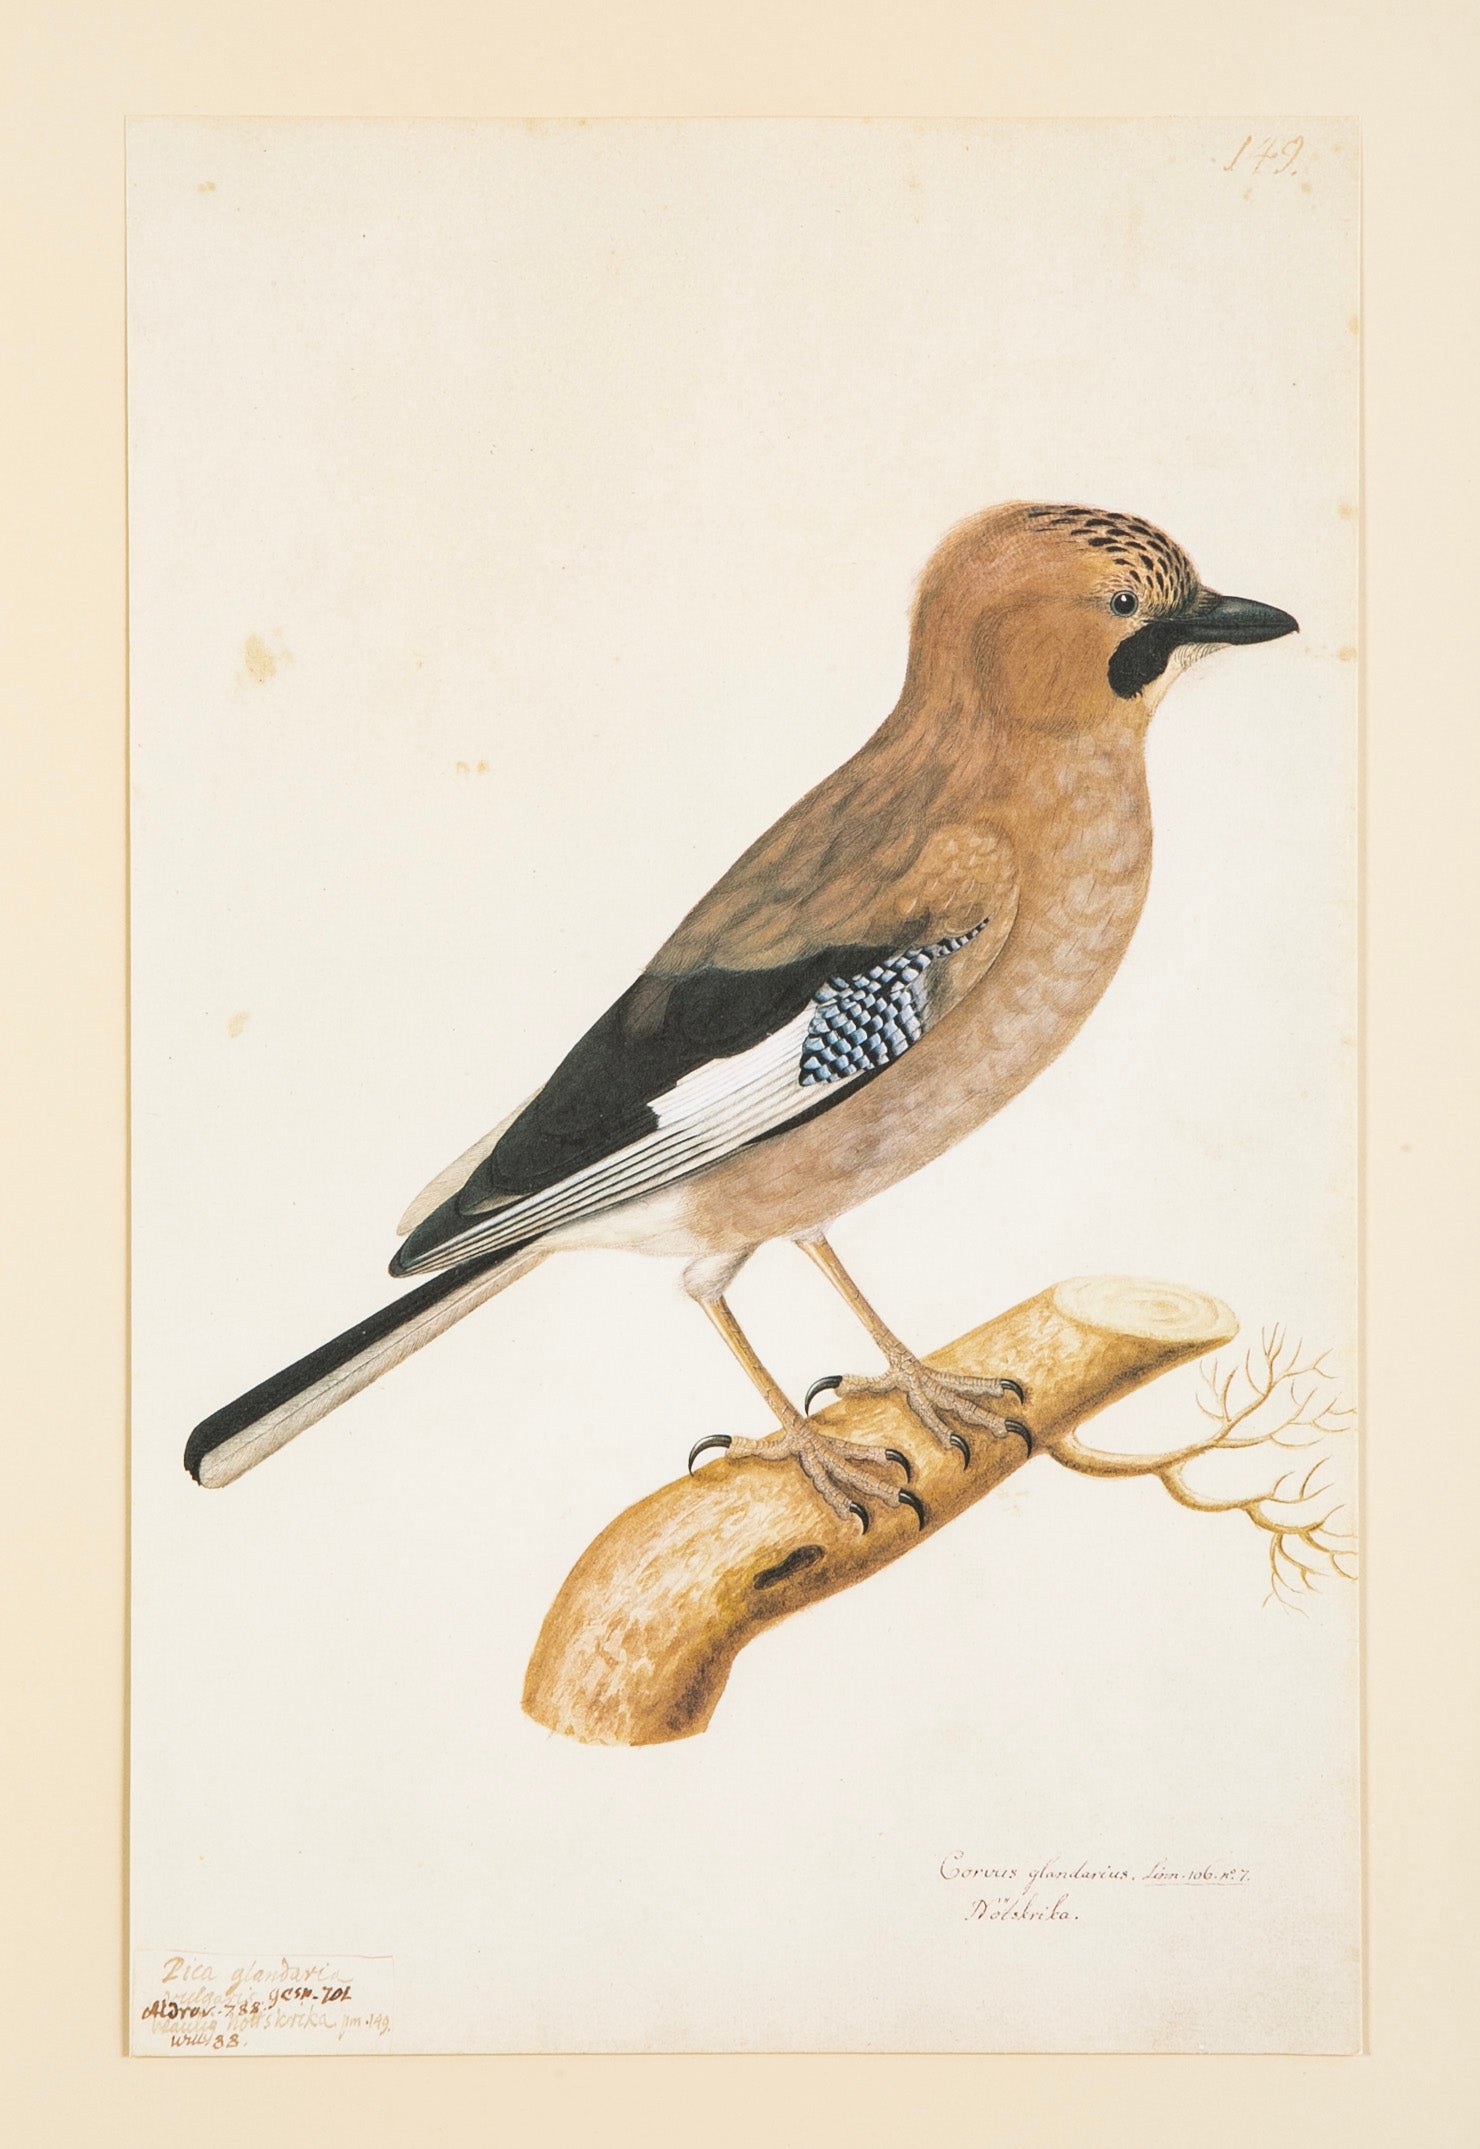 Offset Lithograph from "The Great Bird Book" by Olaf Rudbeck The Younger